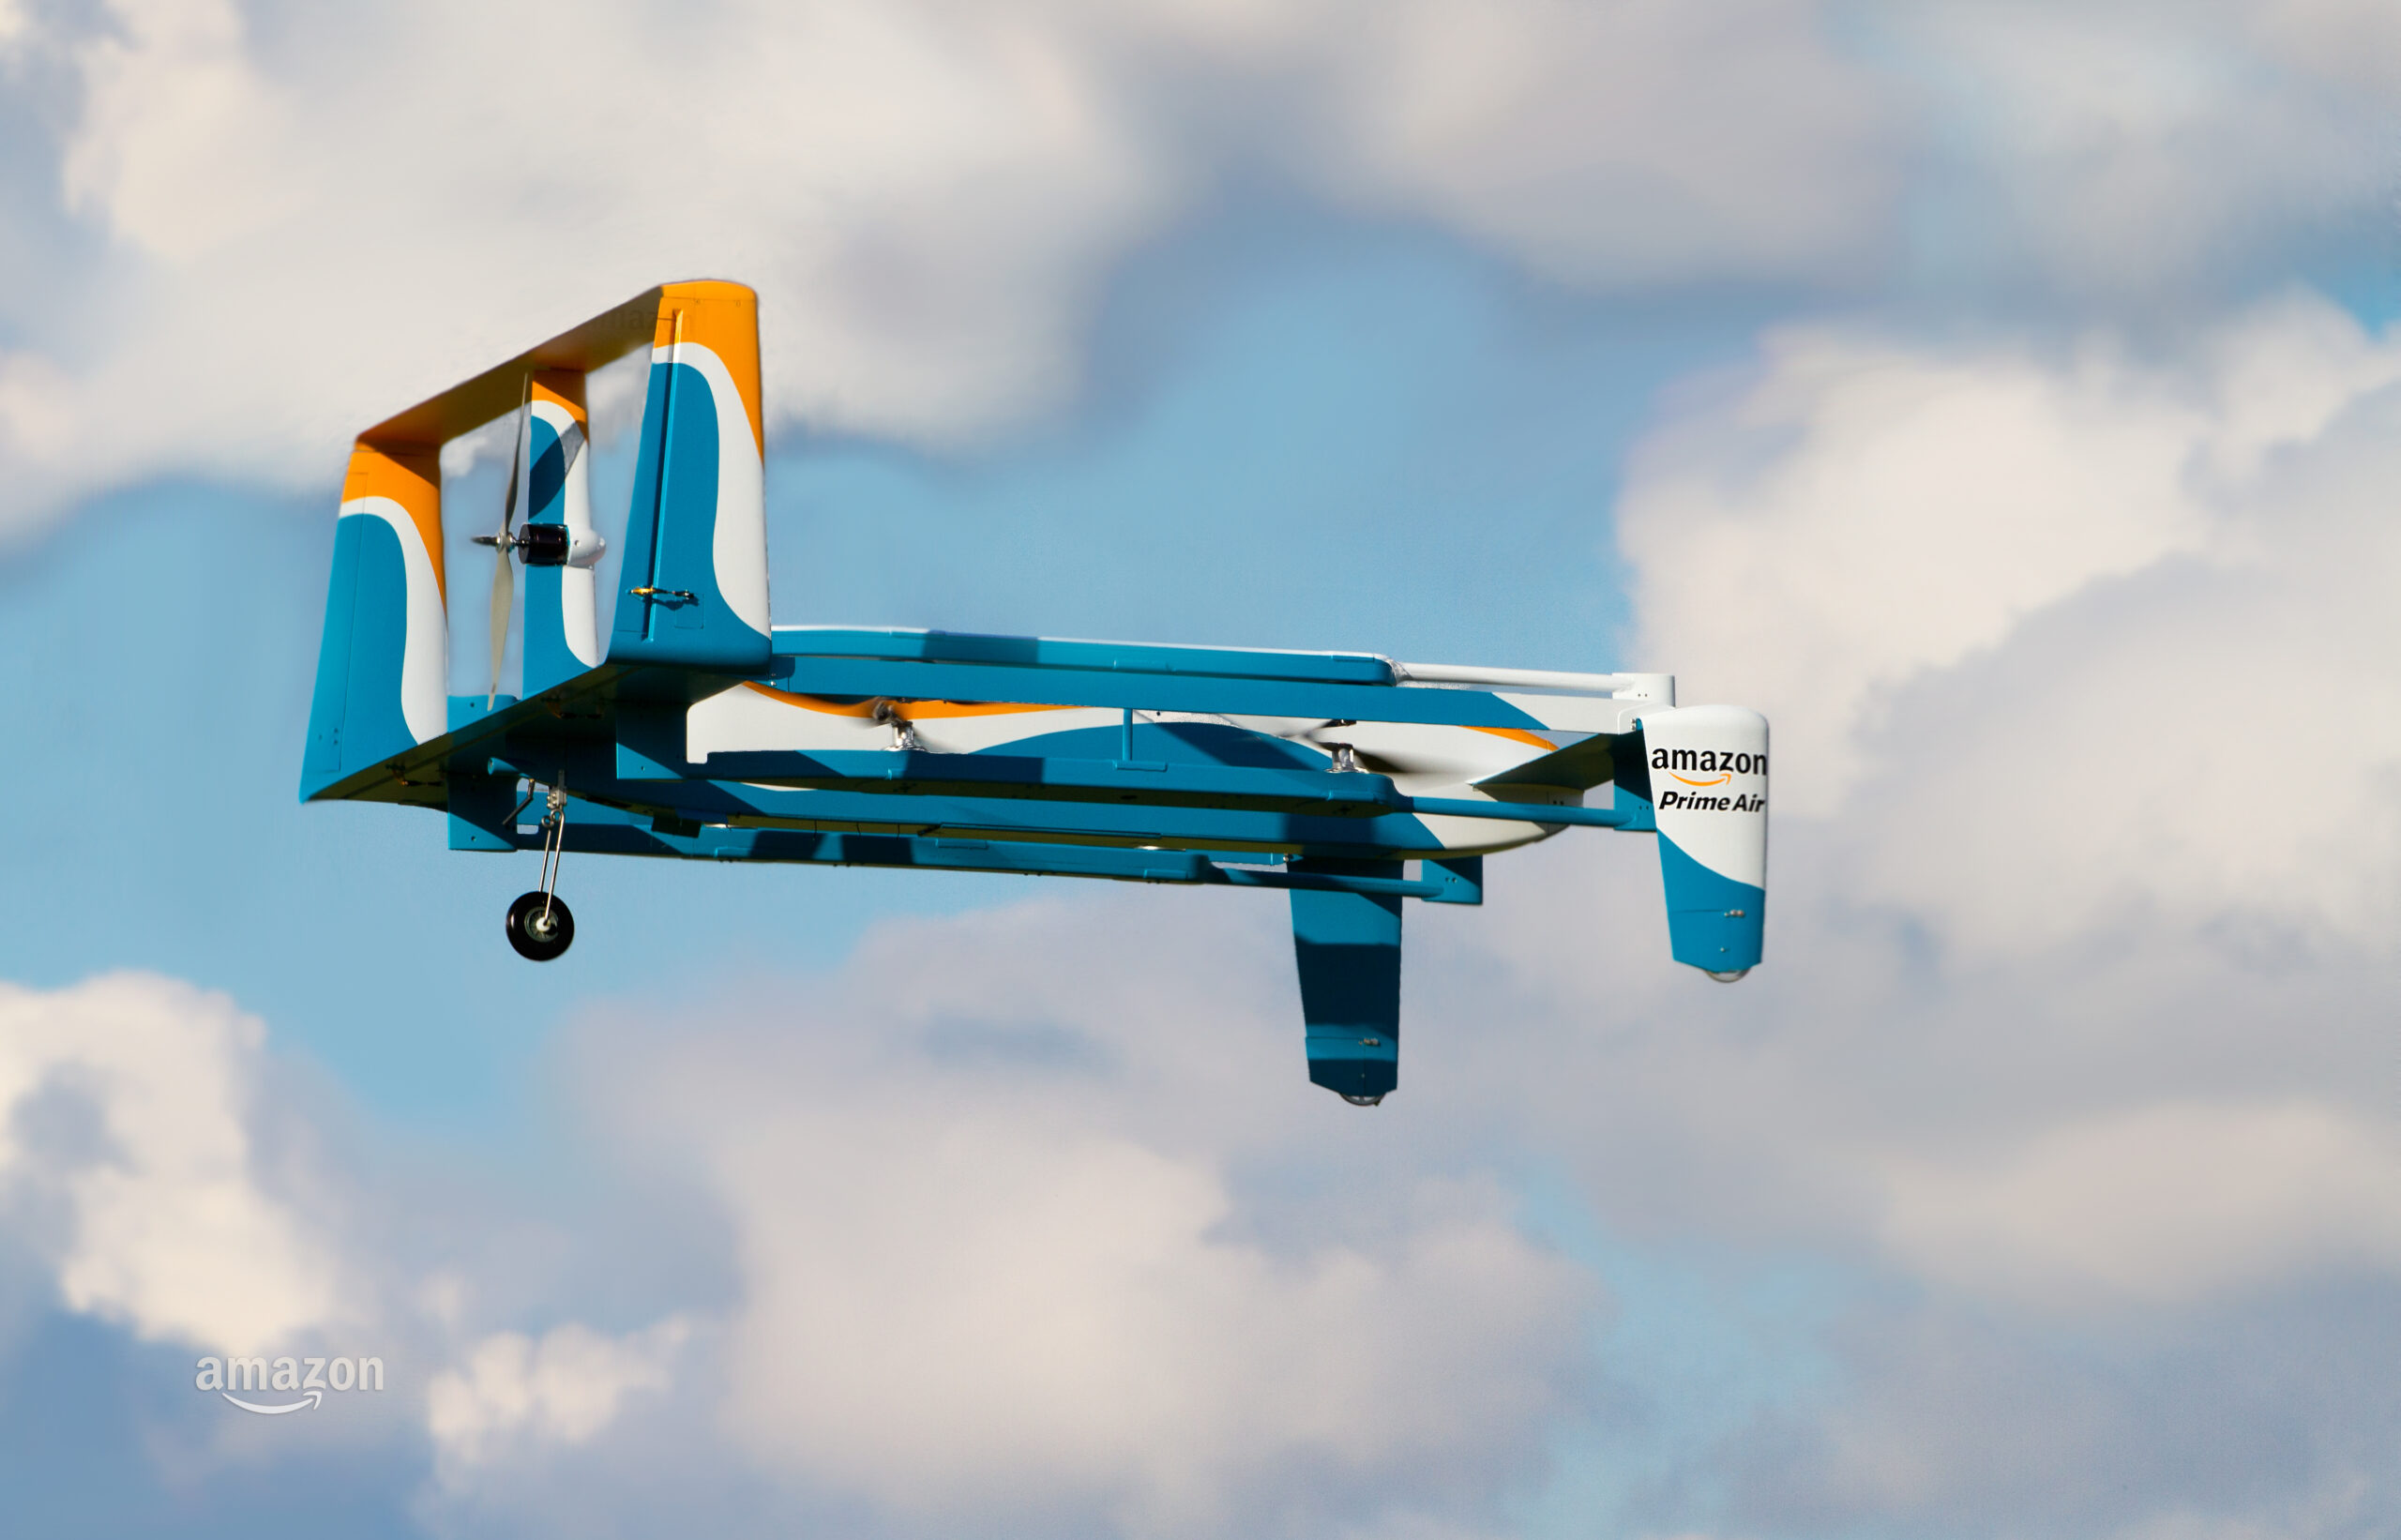 We Now Know Where Amazon Will Be Testing Their Delivery Drones